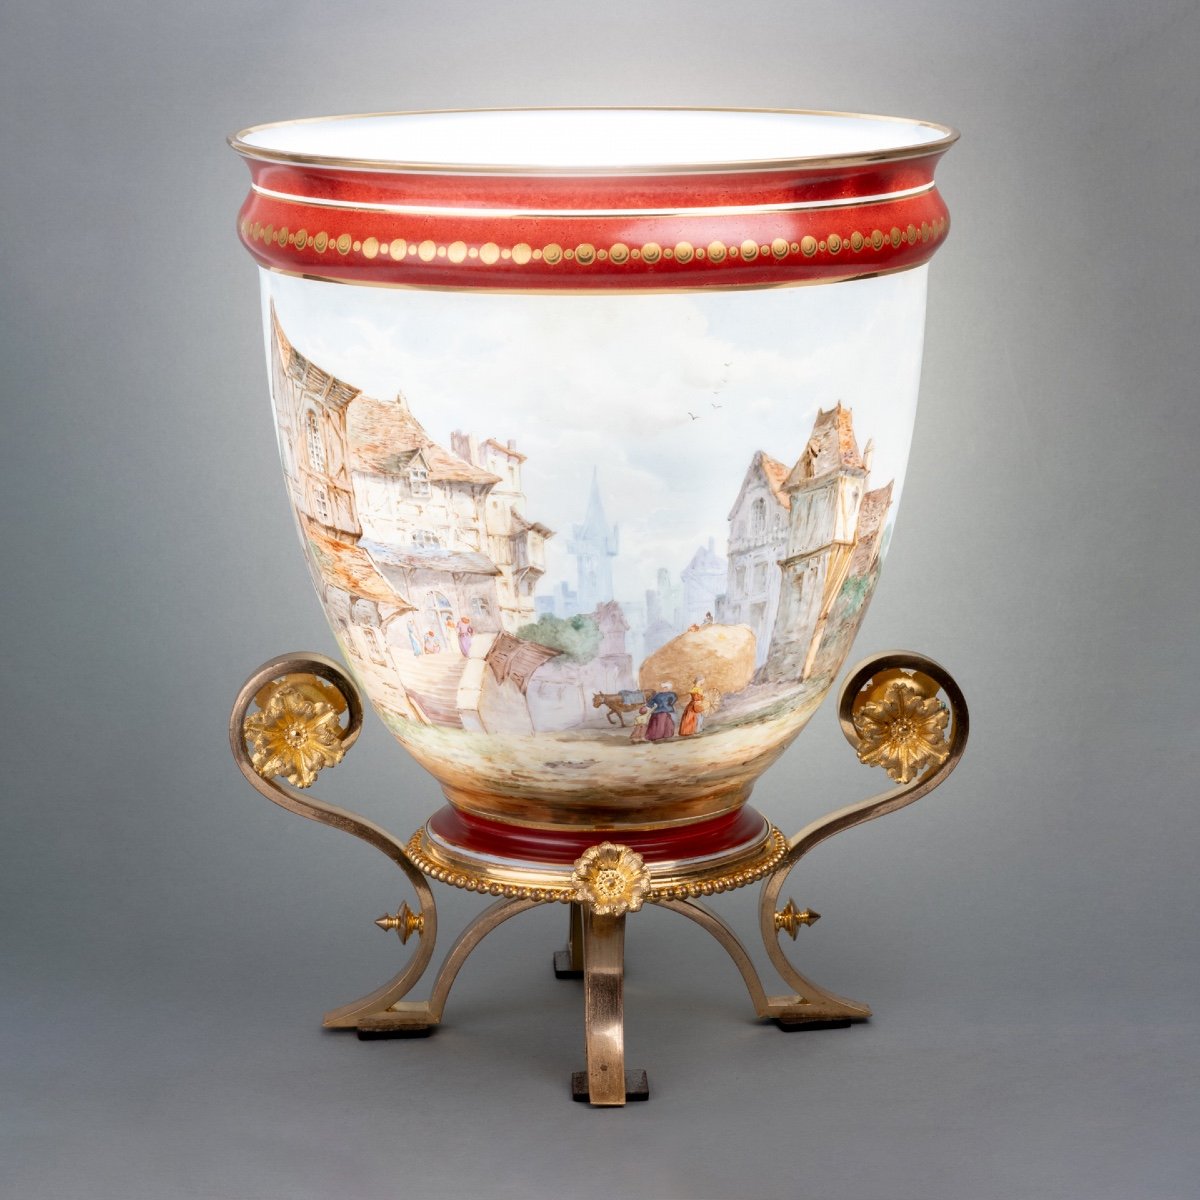 Opaline Vase By Baccarat, Dated 1869